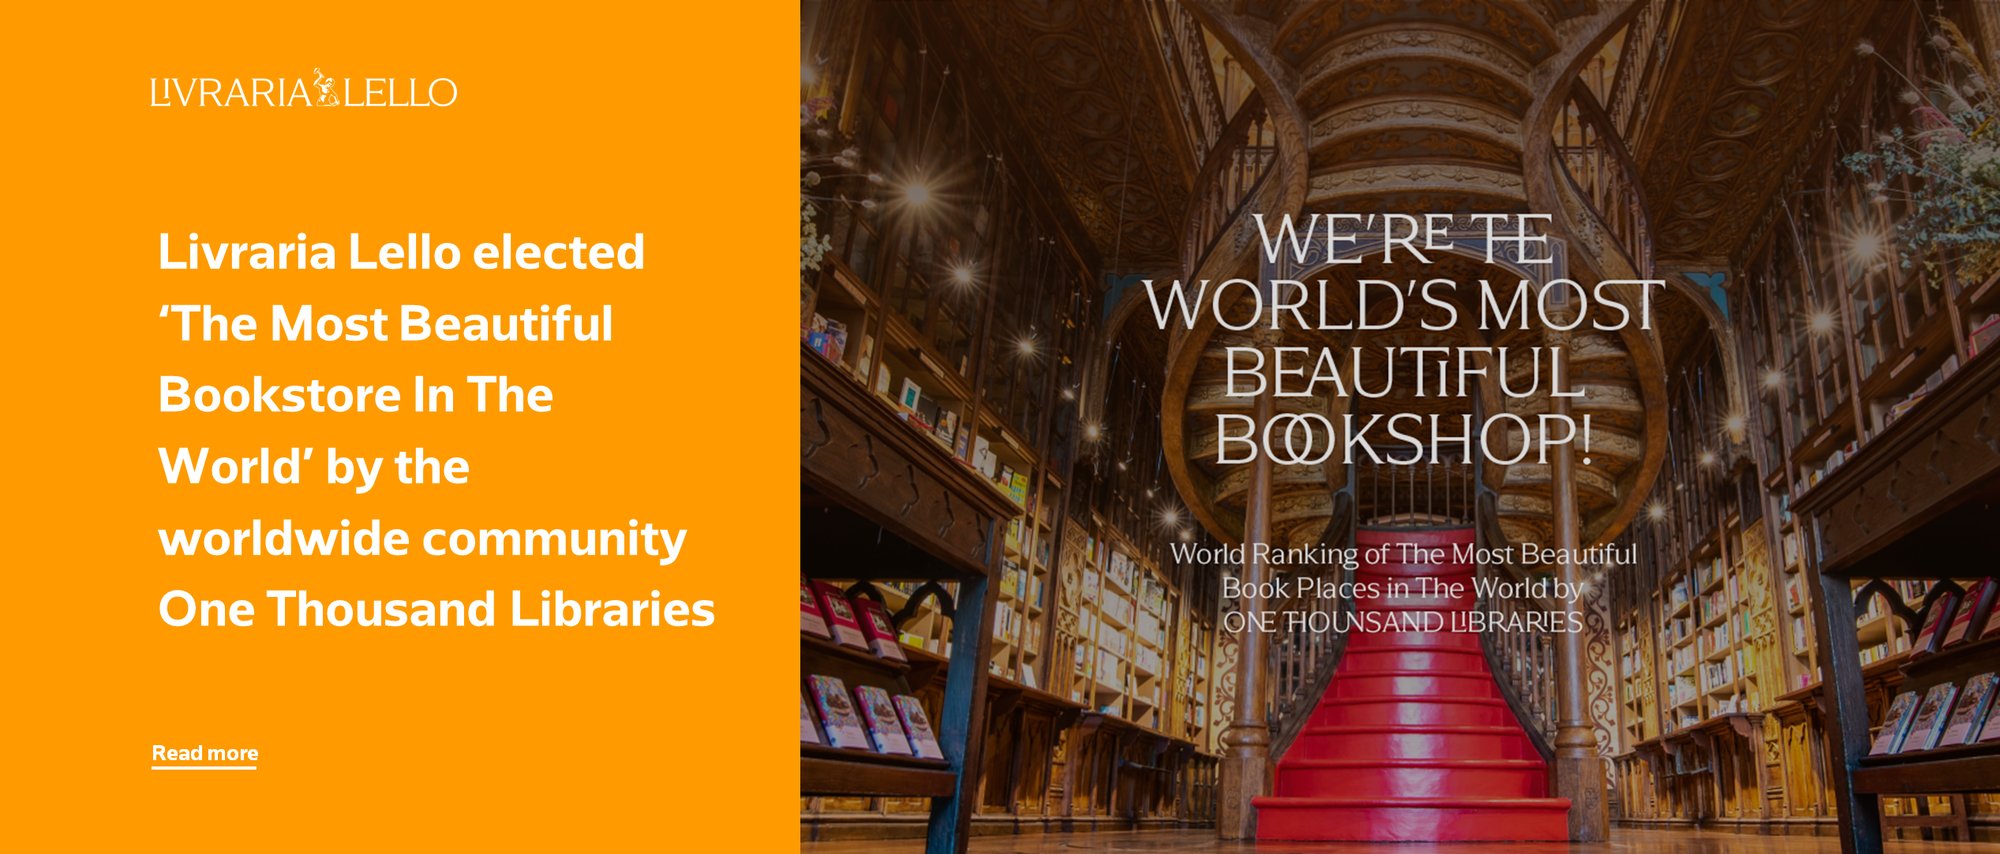 Livraria Lello elected ‘The Most Beautiful Bookstore In The World’ by the worldwide community One Thousand Libraries